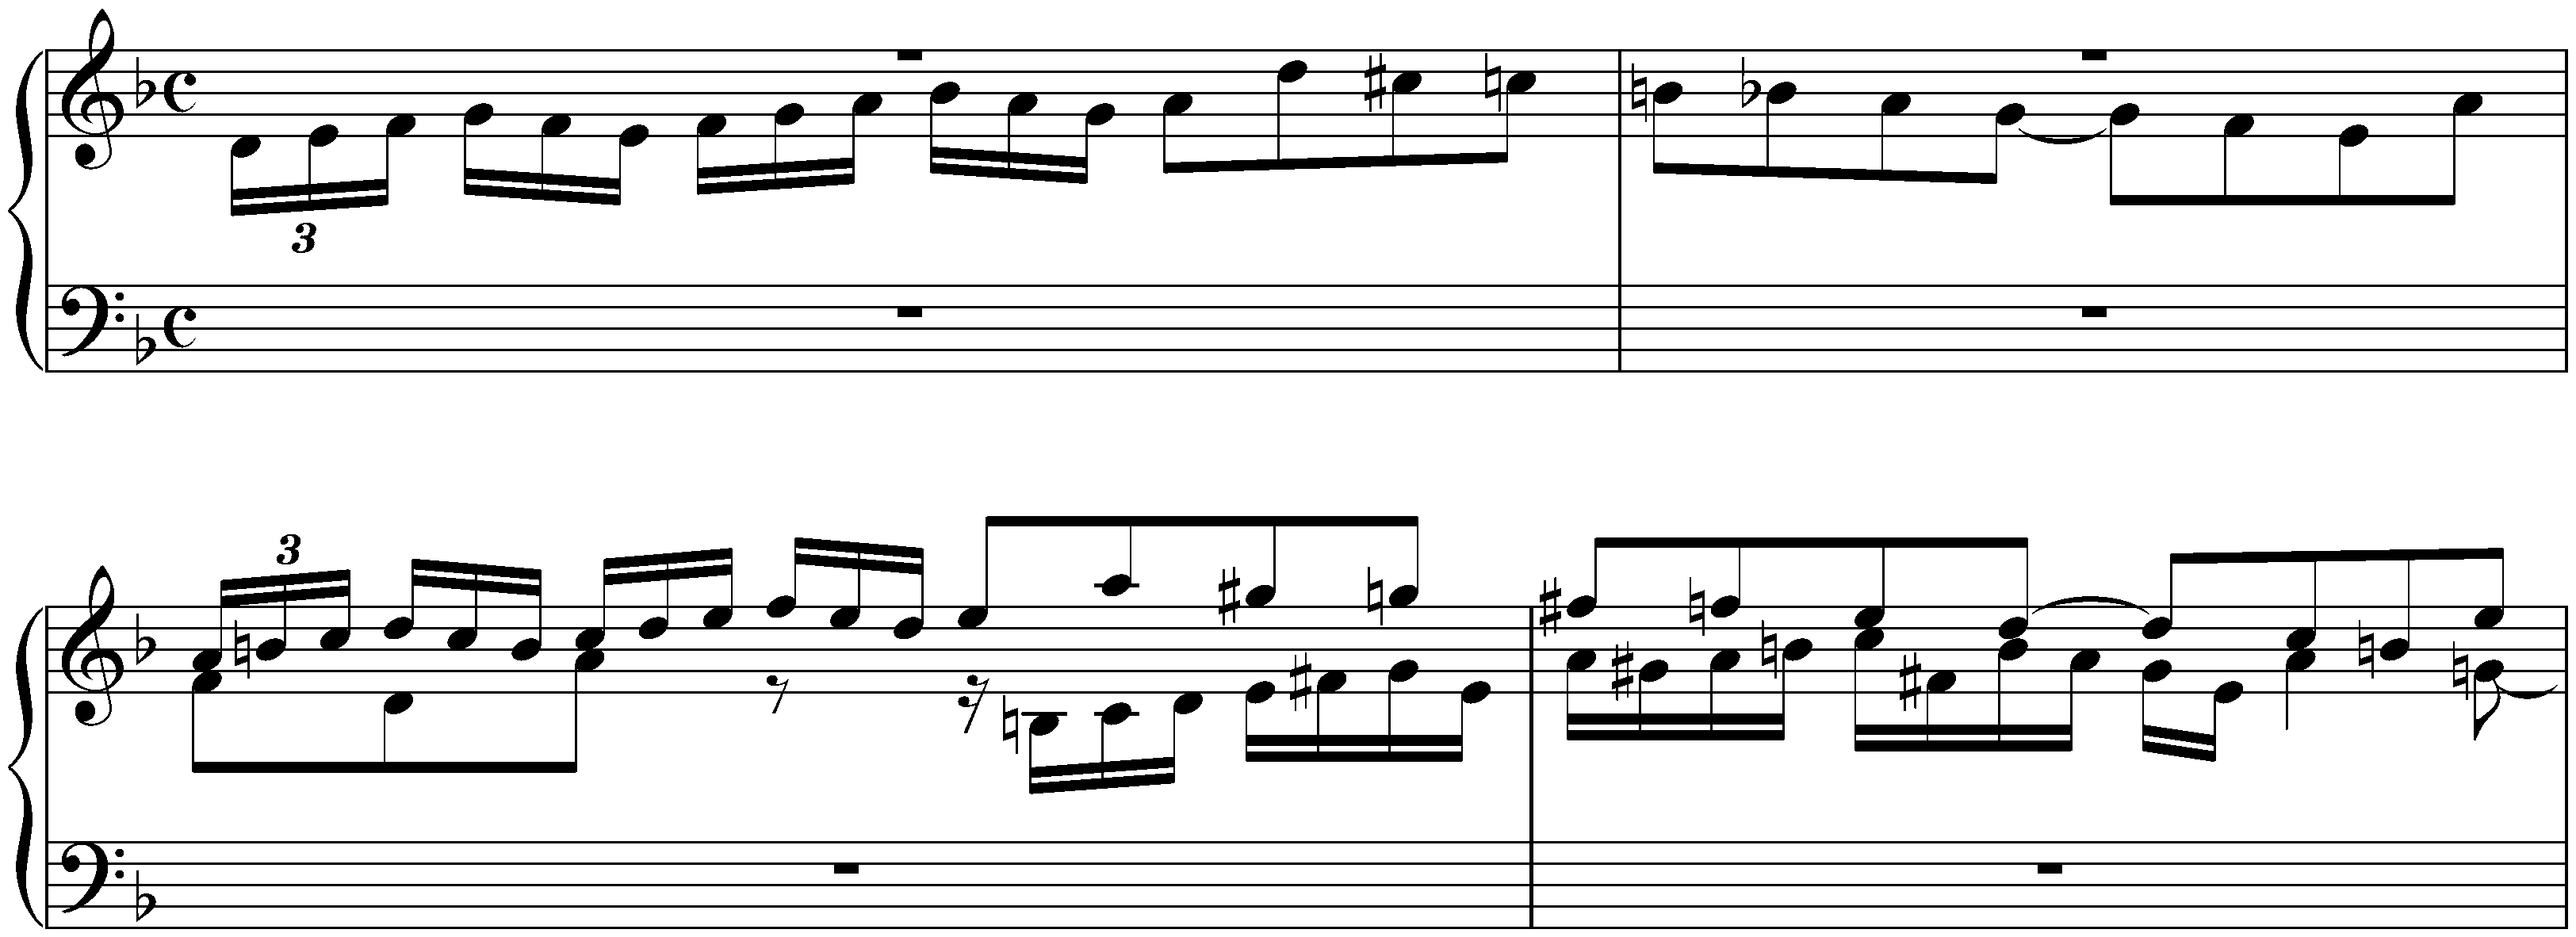 The Well-Tempered Clavier, Book 2, BWV 870–893; 6. D minor, BWV 875, Fugue